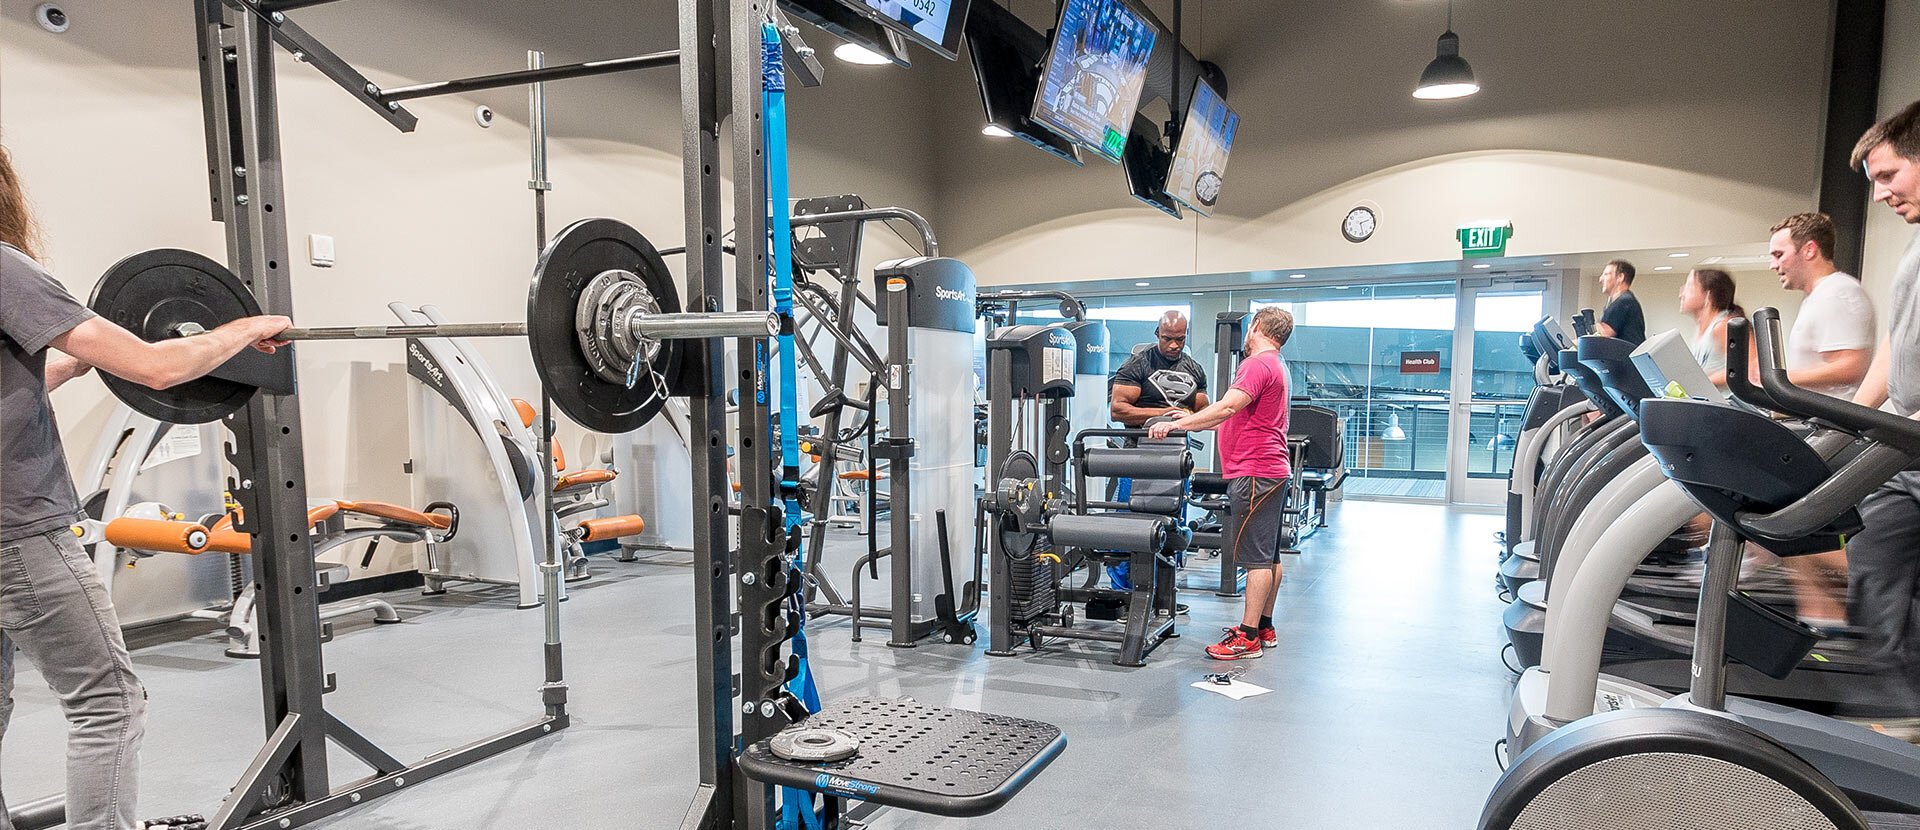 Sweetwater's on-site fitness facility.